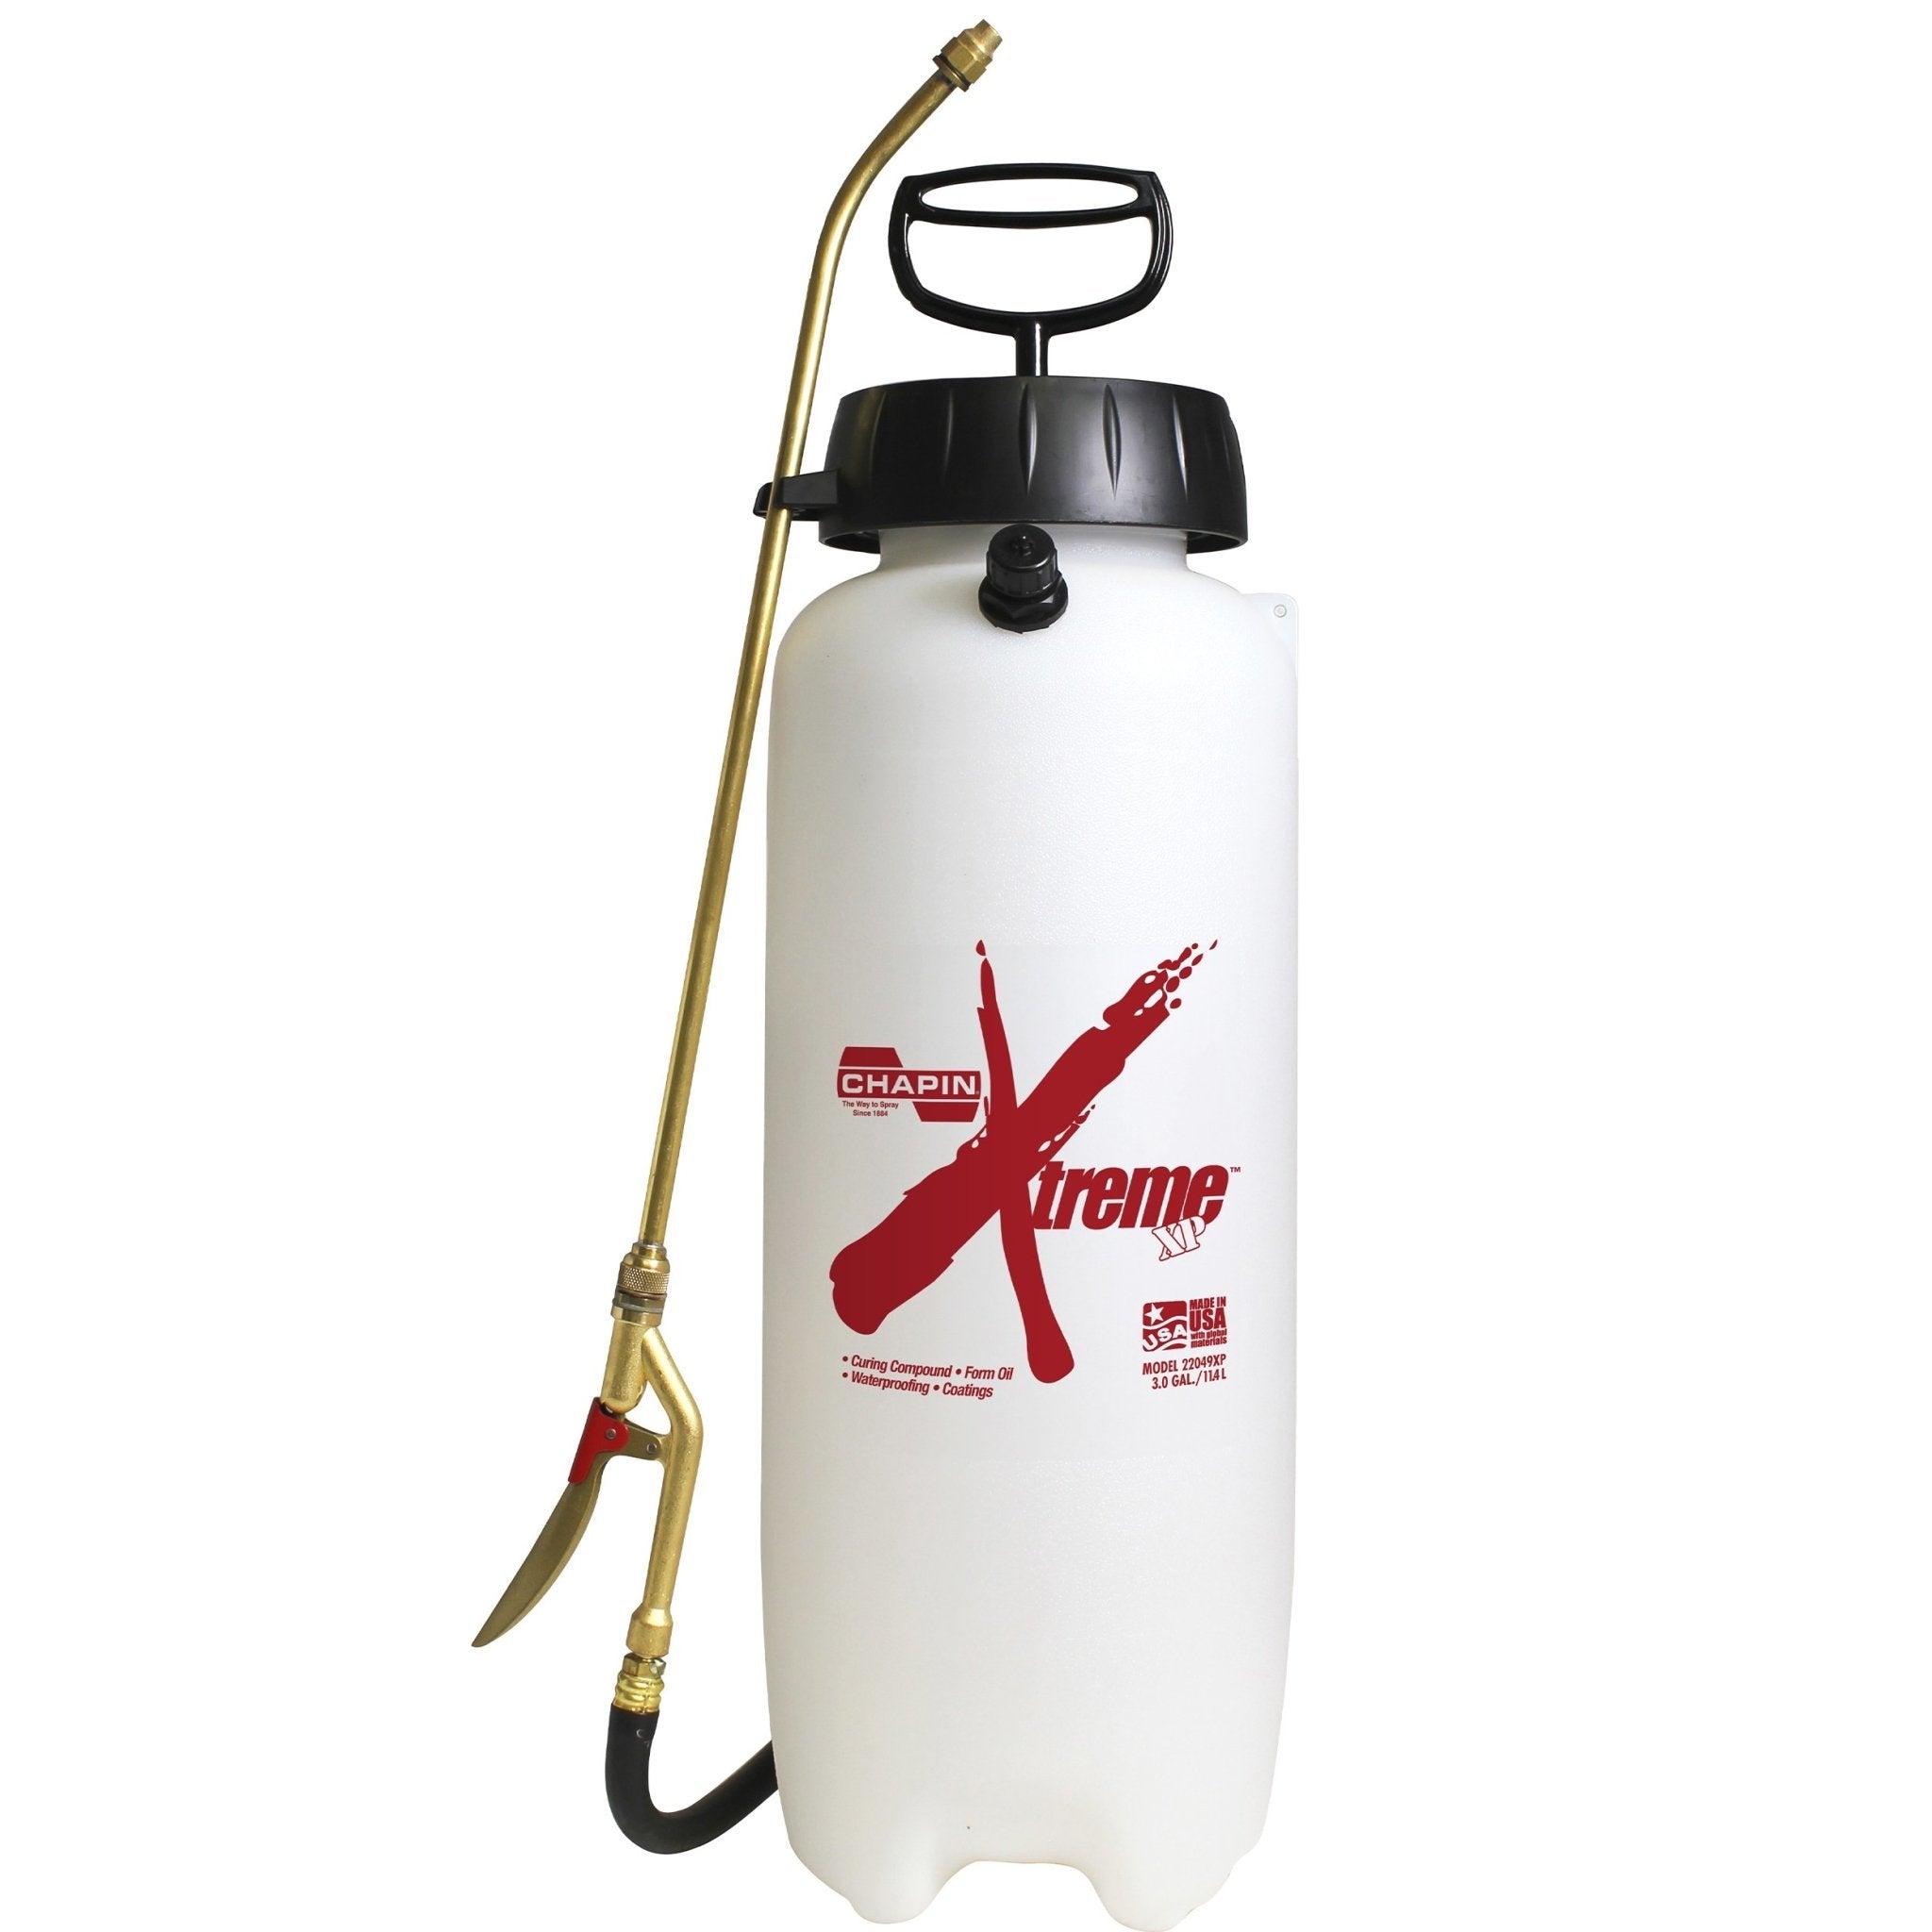 Professional Sprayers suitablers for Acid & Acetone